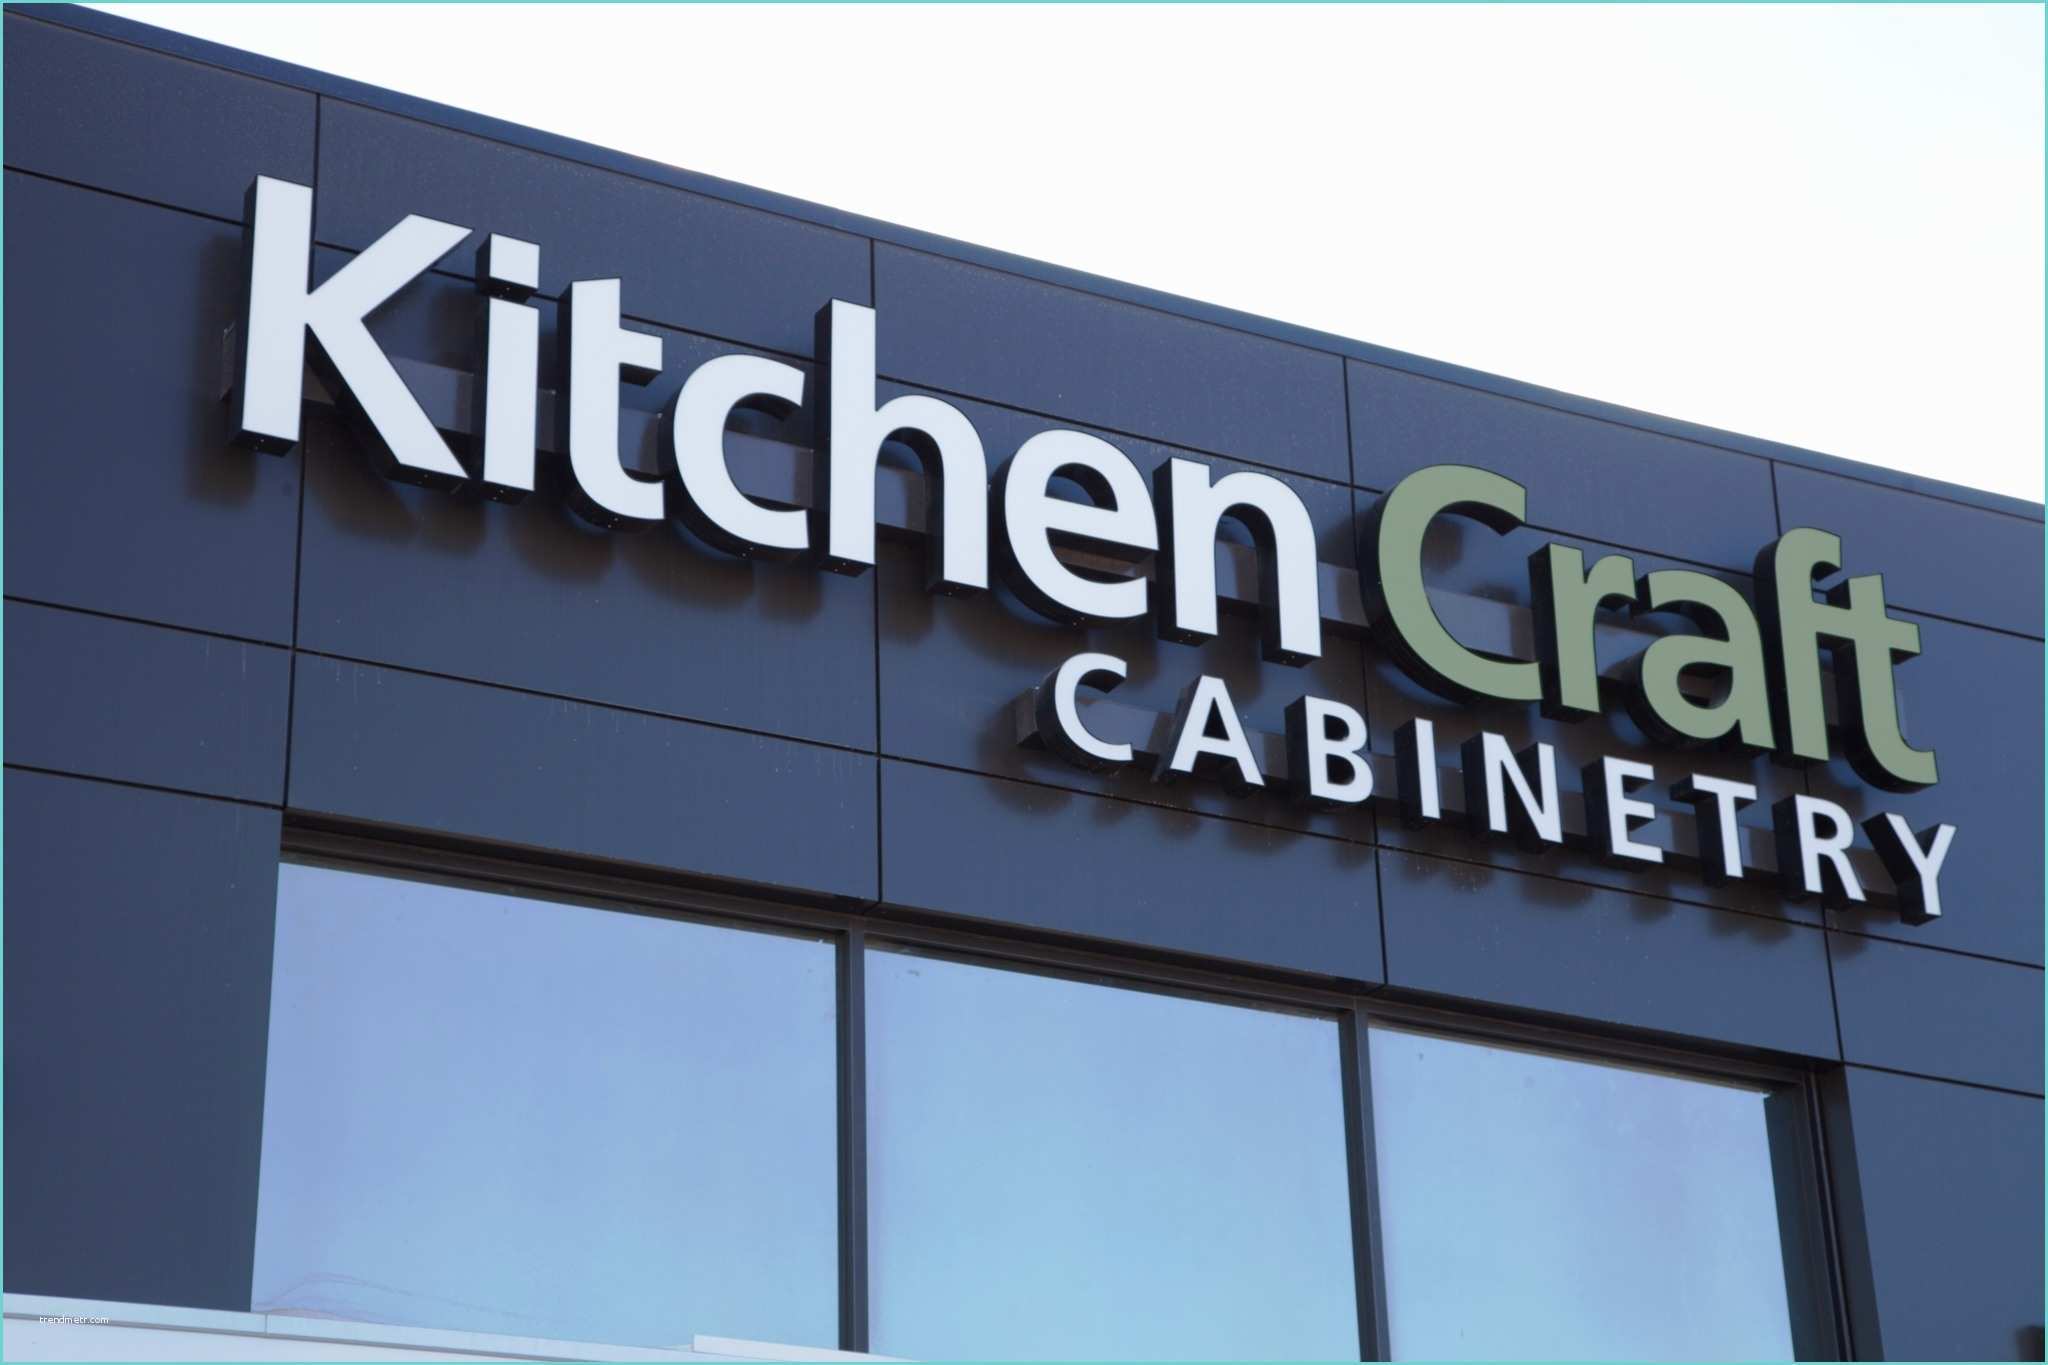 Factory Kitchen Direct Winnipeg Home and Garden In Winnipeg Mb Page 59